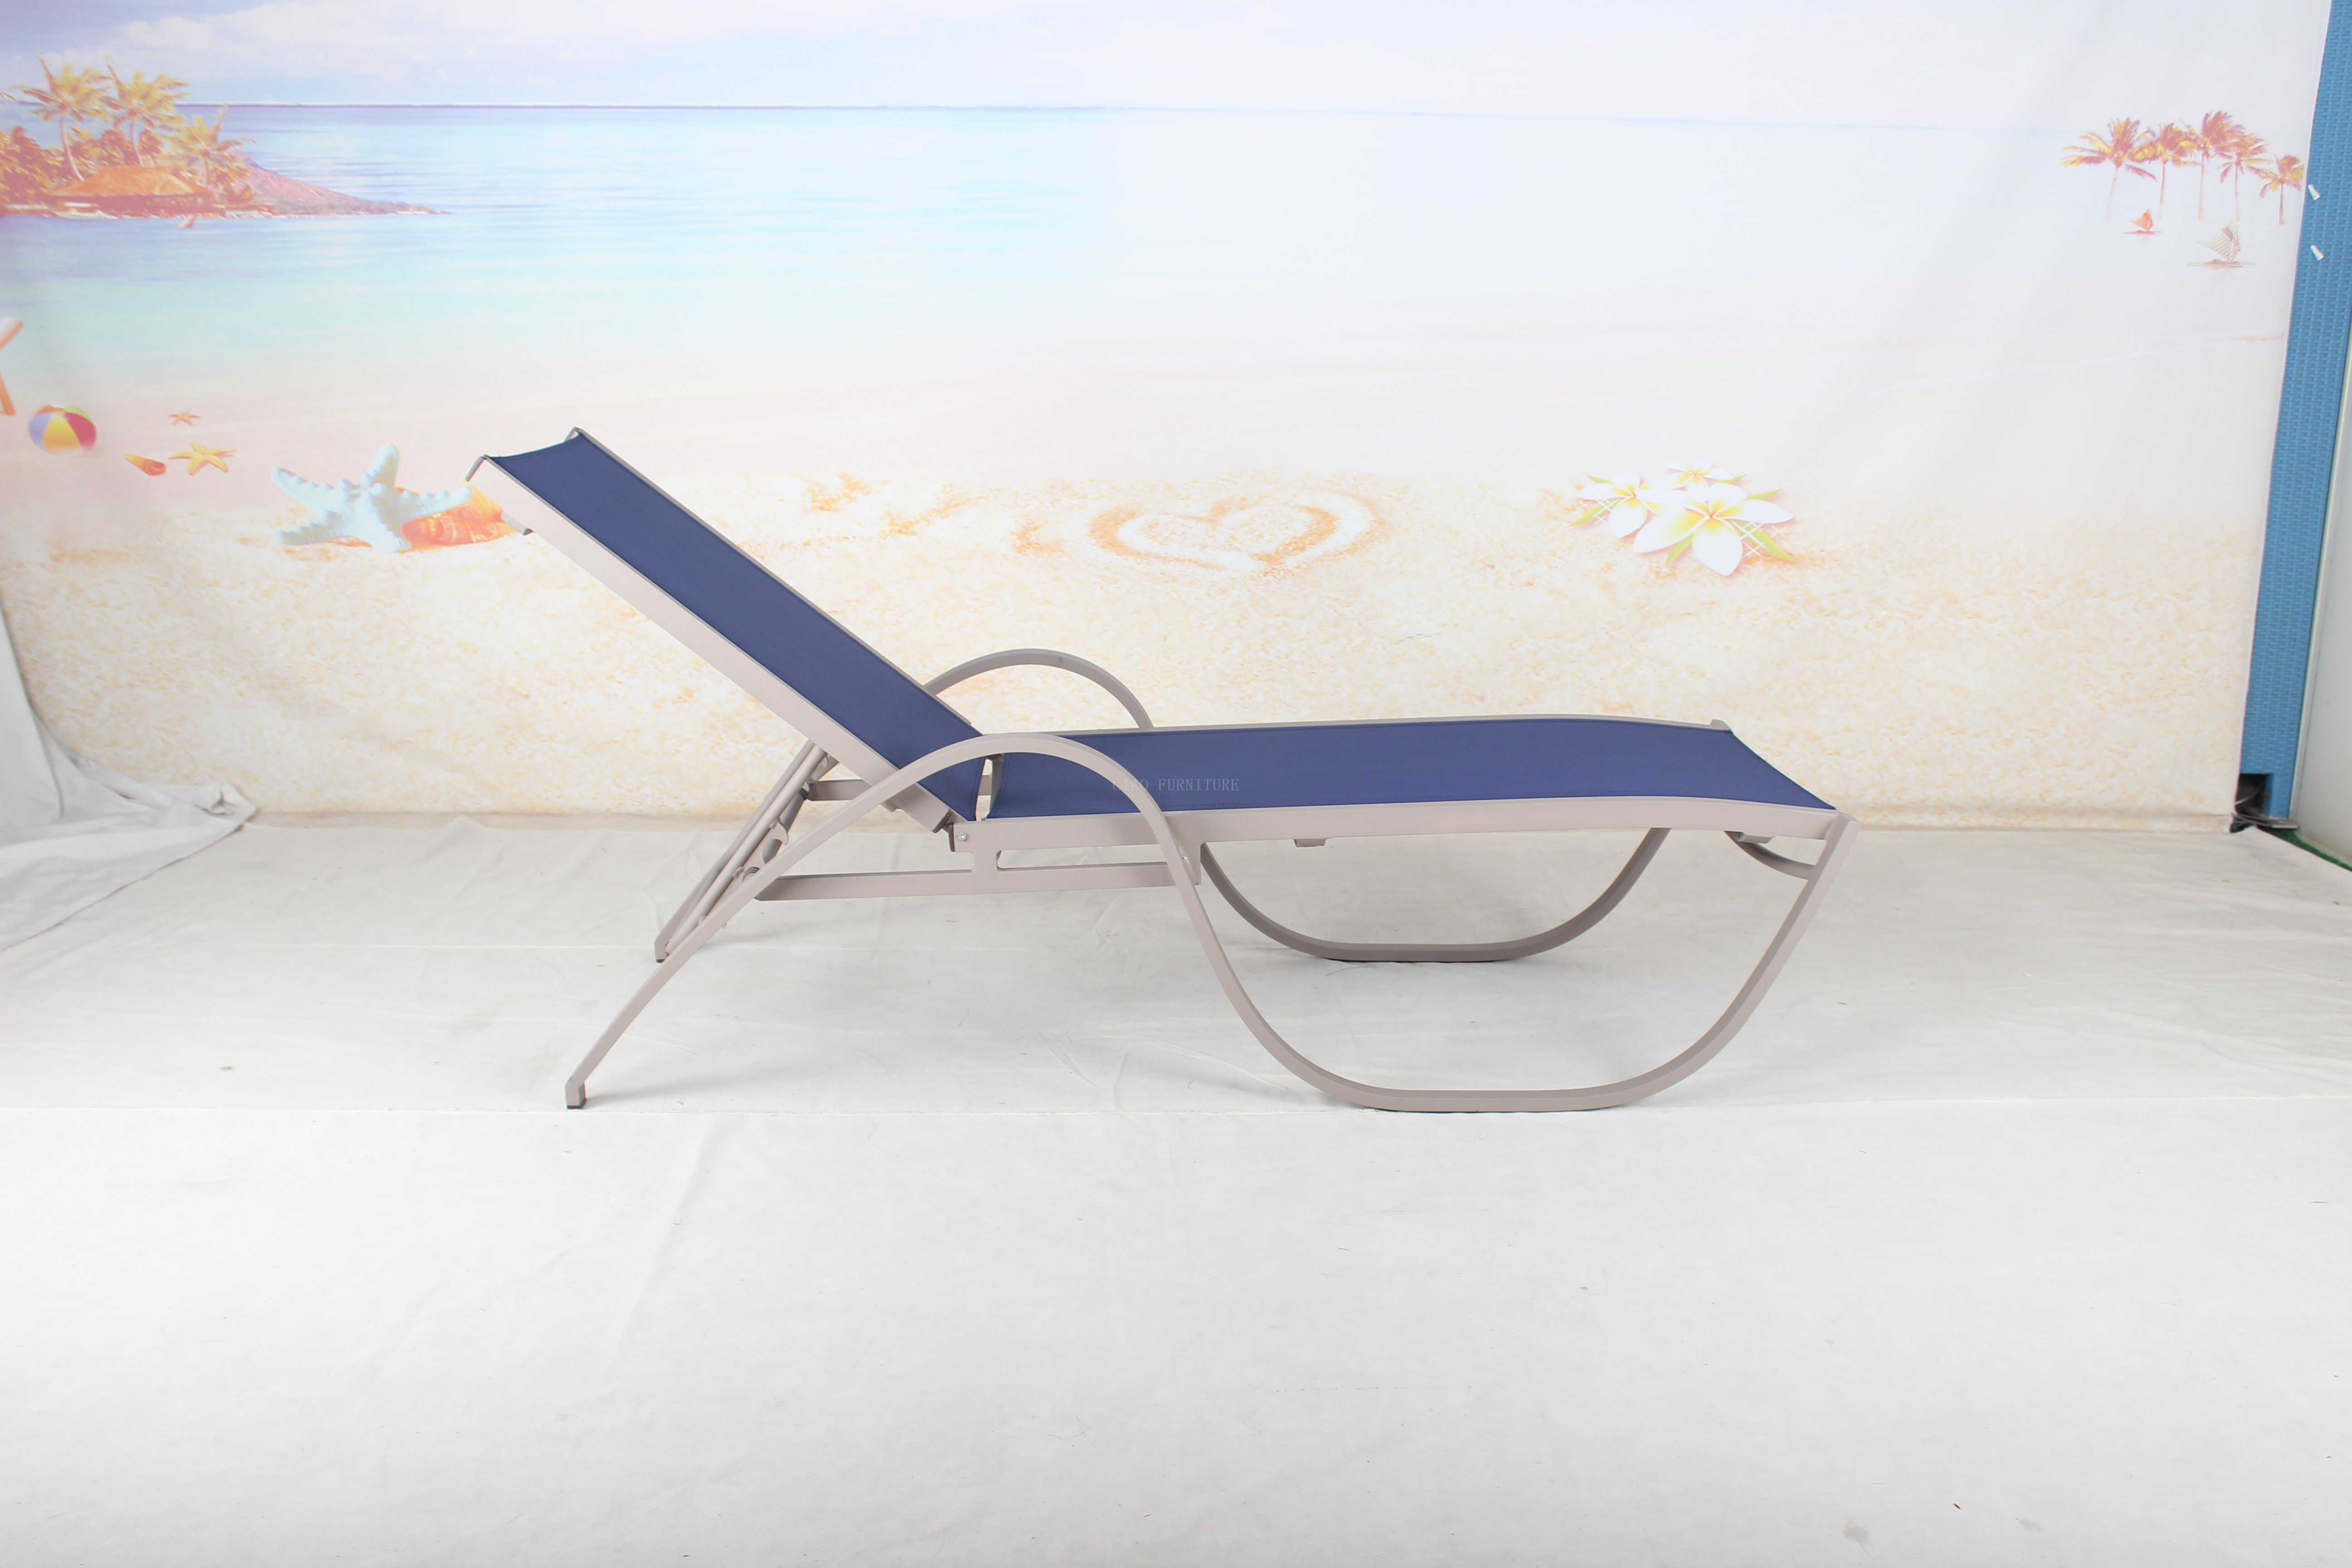 Outdoor patio pool chaise lounge chair